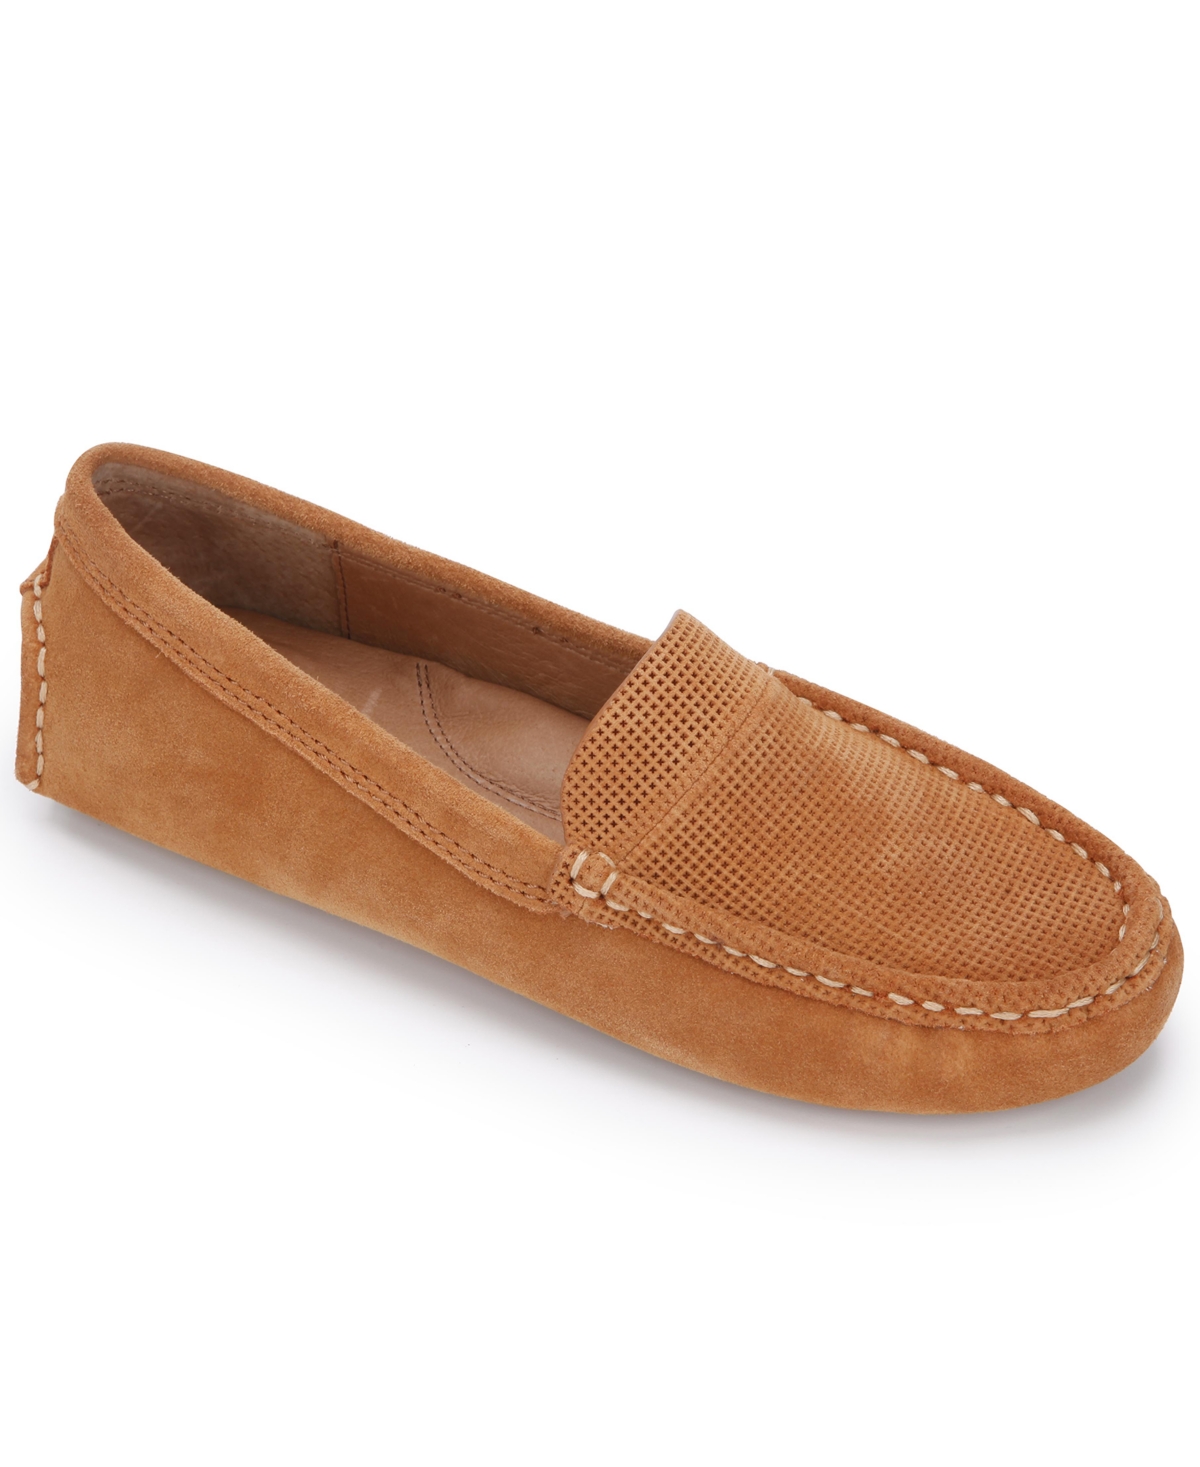 By Kenneth Cole Women's Mina Driver 2 Loafer Flats - Cognac